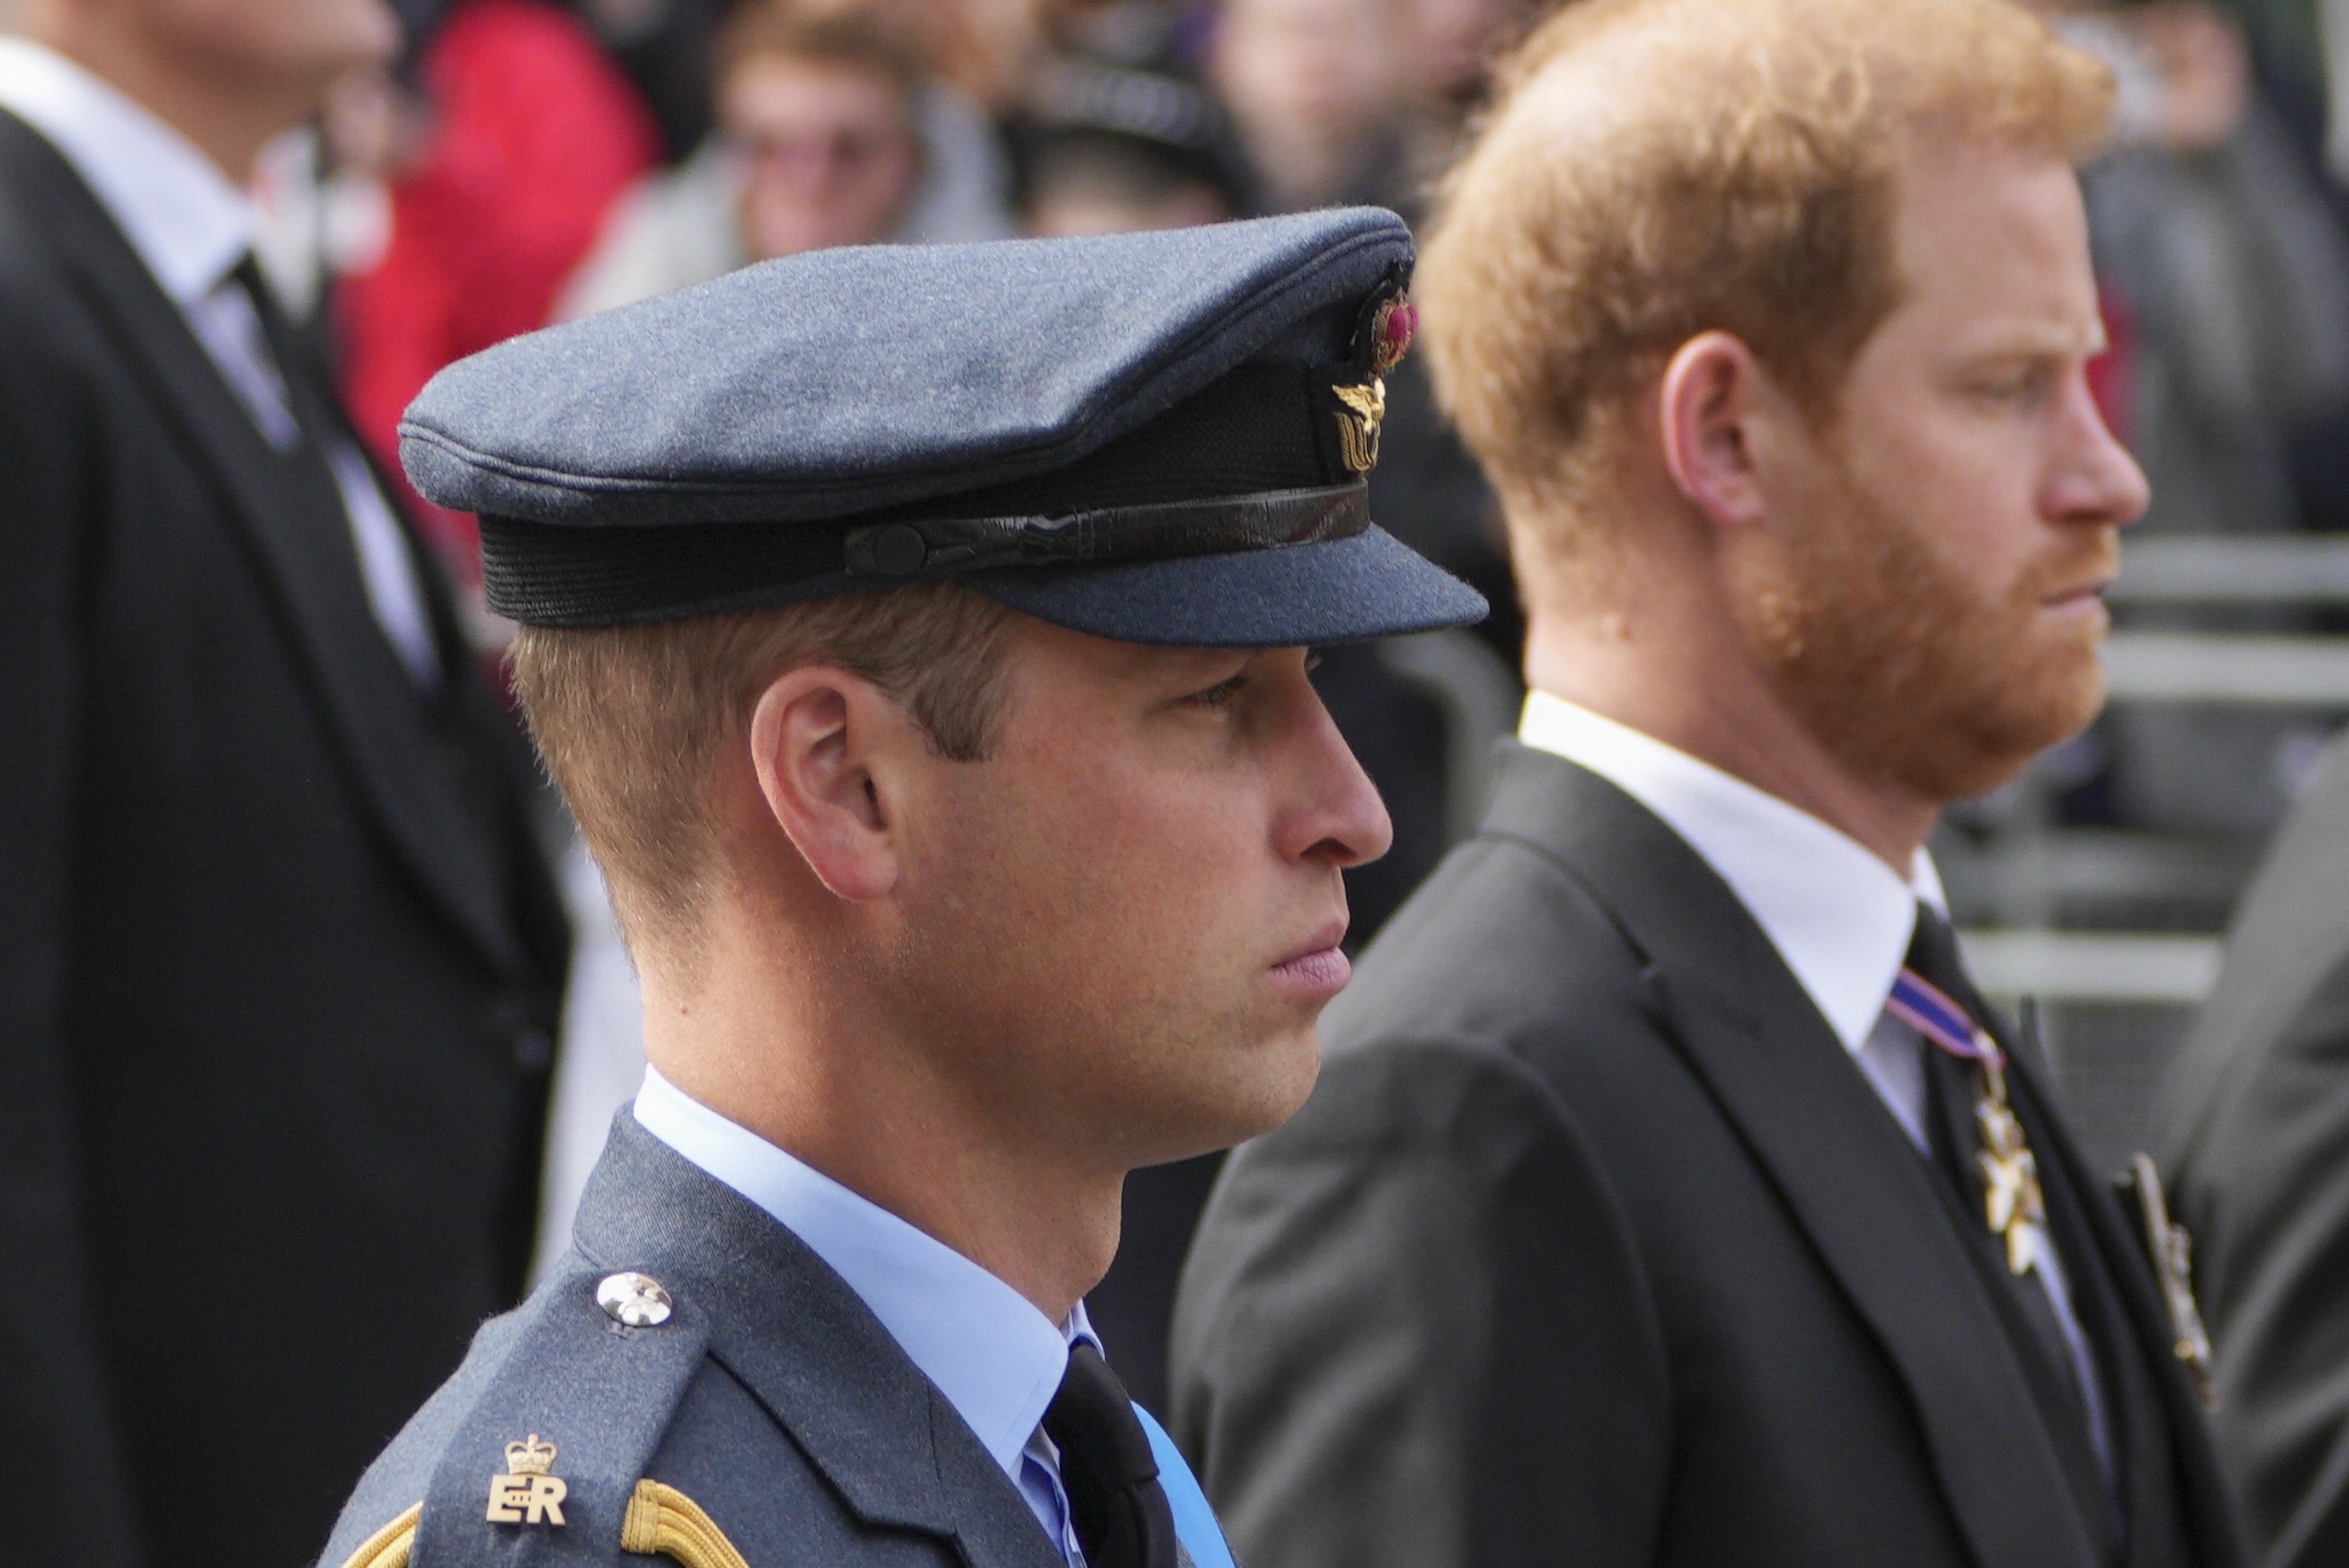 Prince William and Prince Harry at the Queen's funeral in 2023 | Source: Getty Images